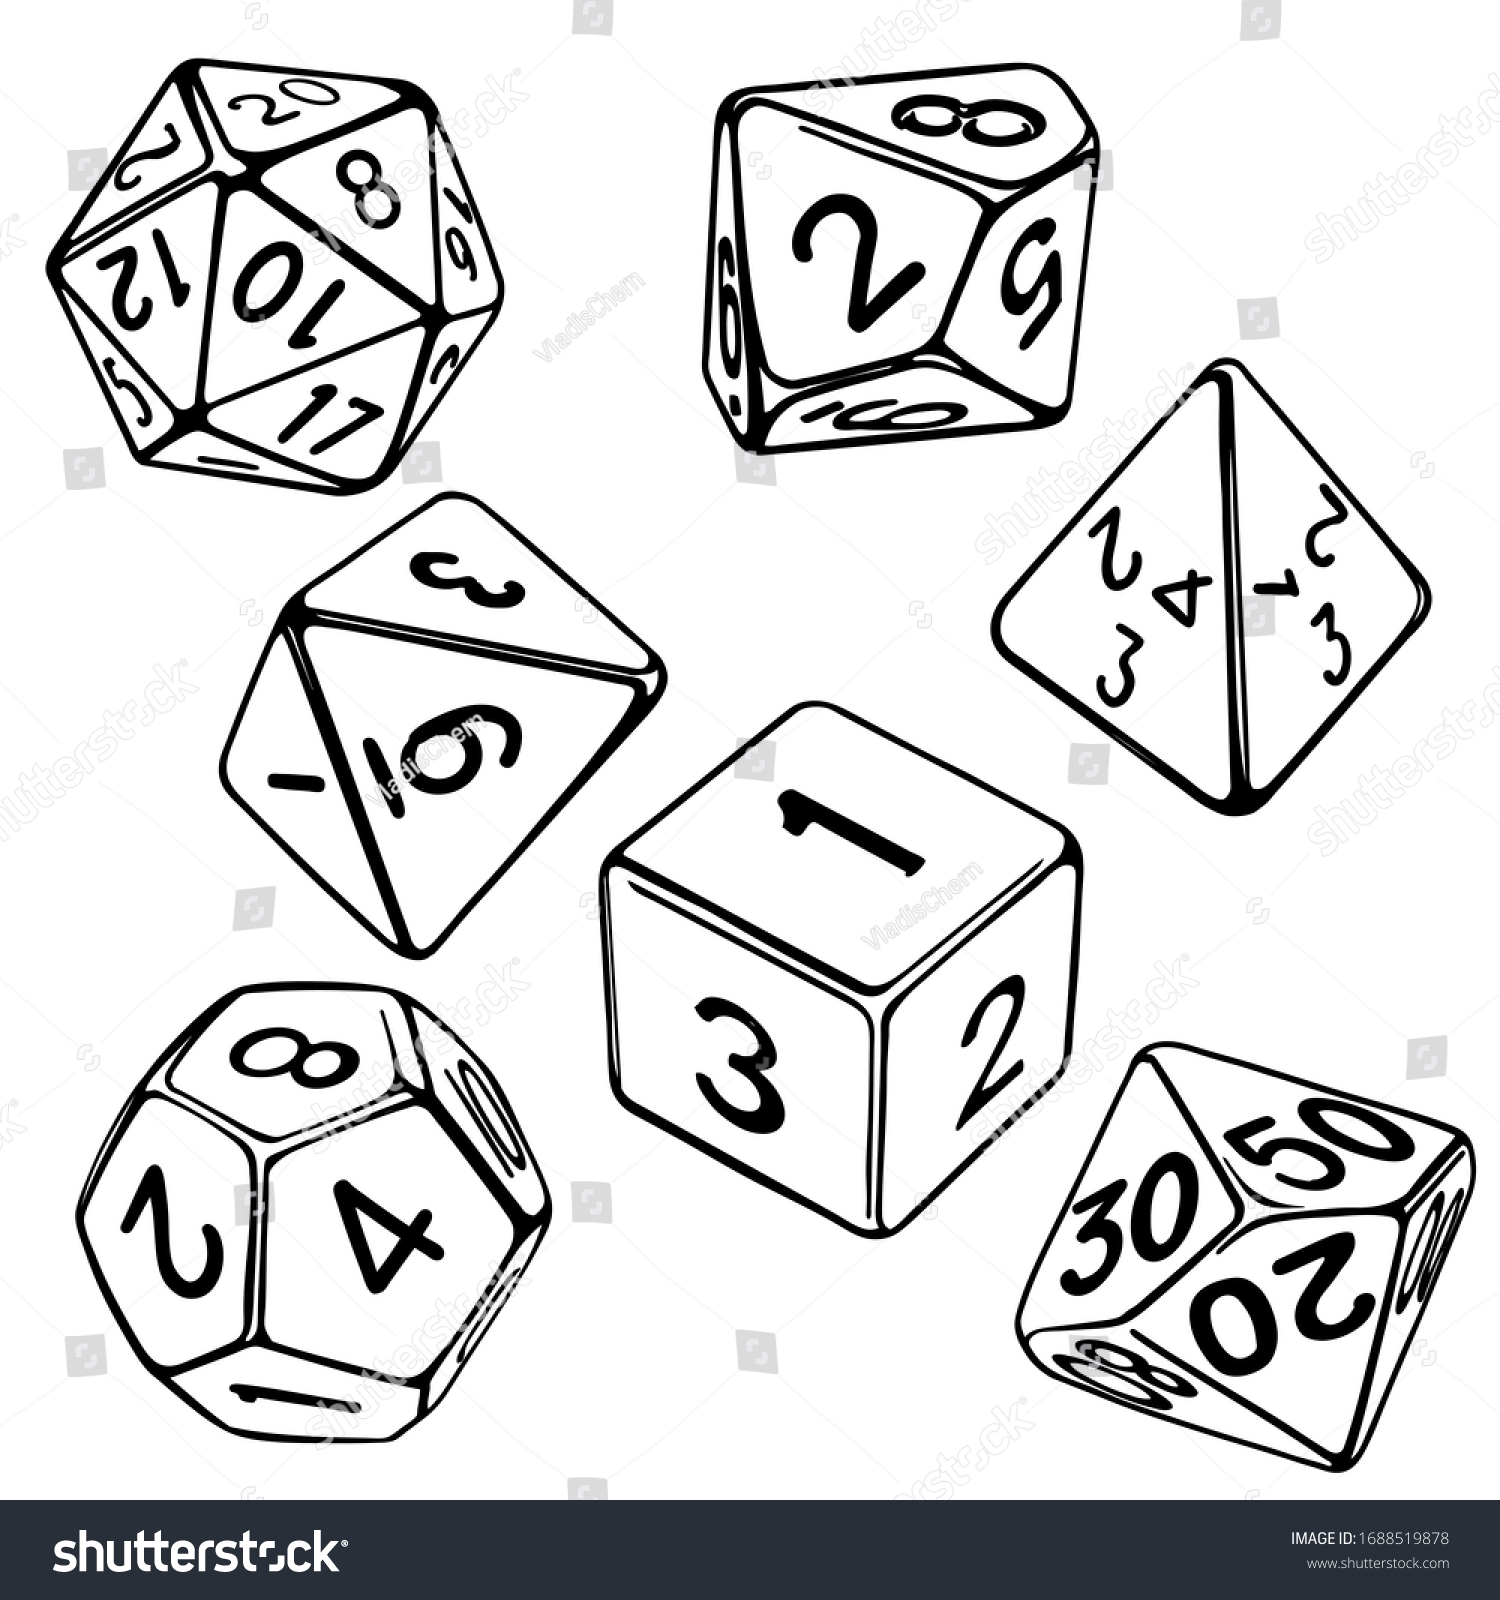 SVG of collection of dice for role-playing games isolated on white background hand drawn vector illustration sketch svg